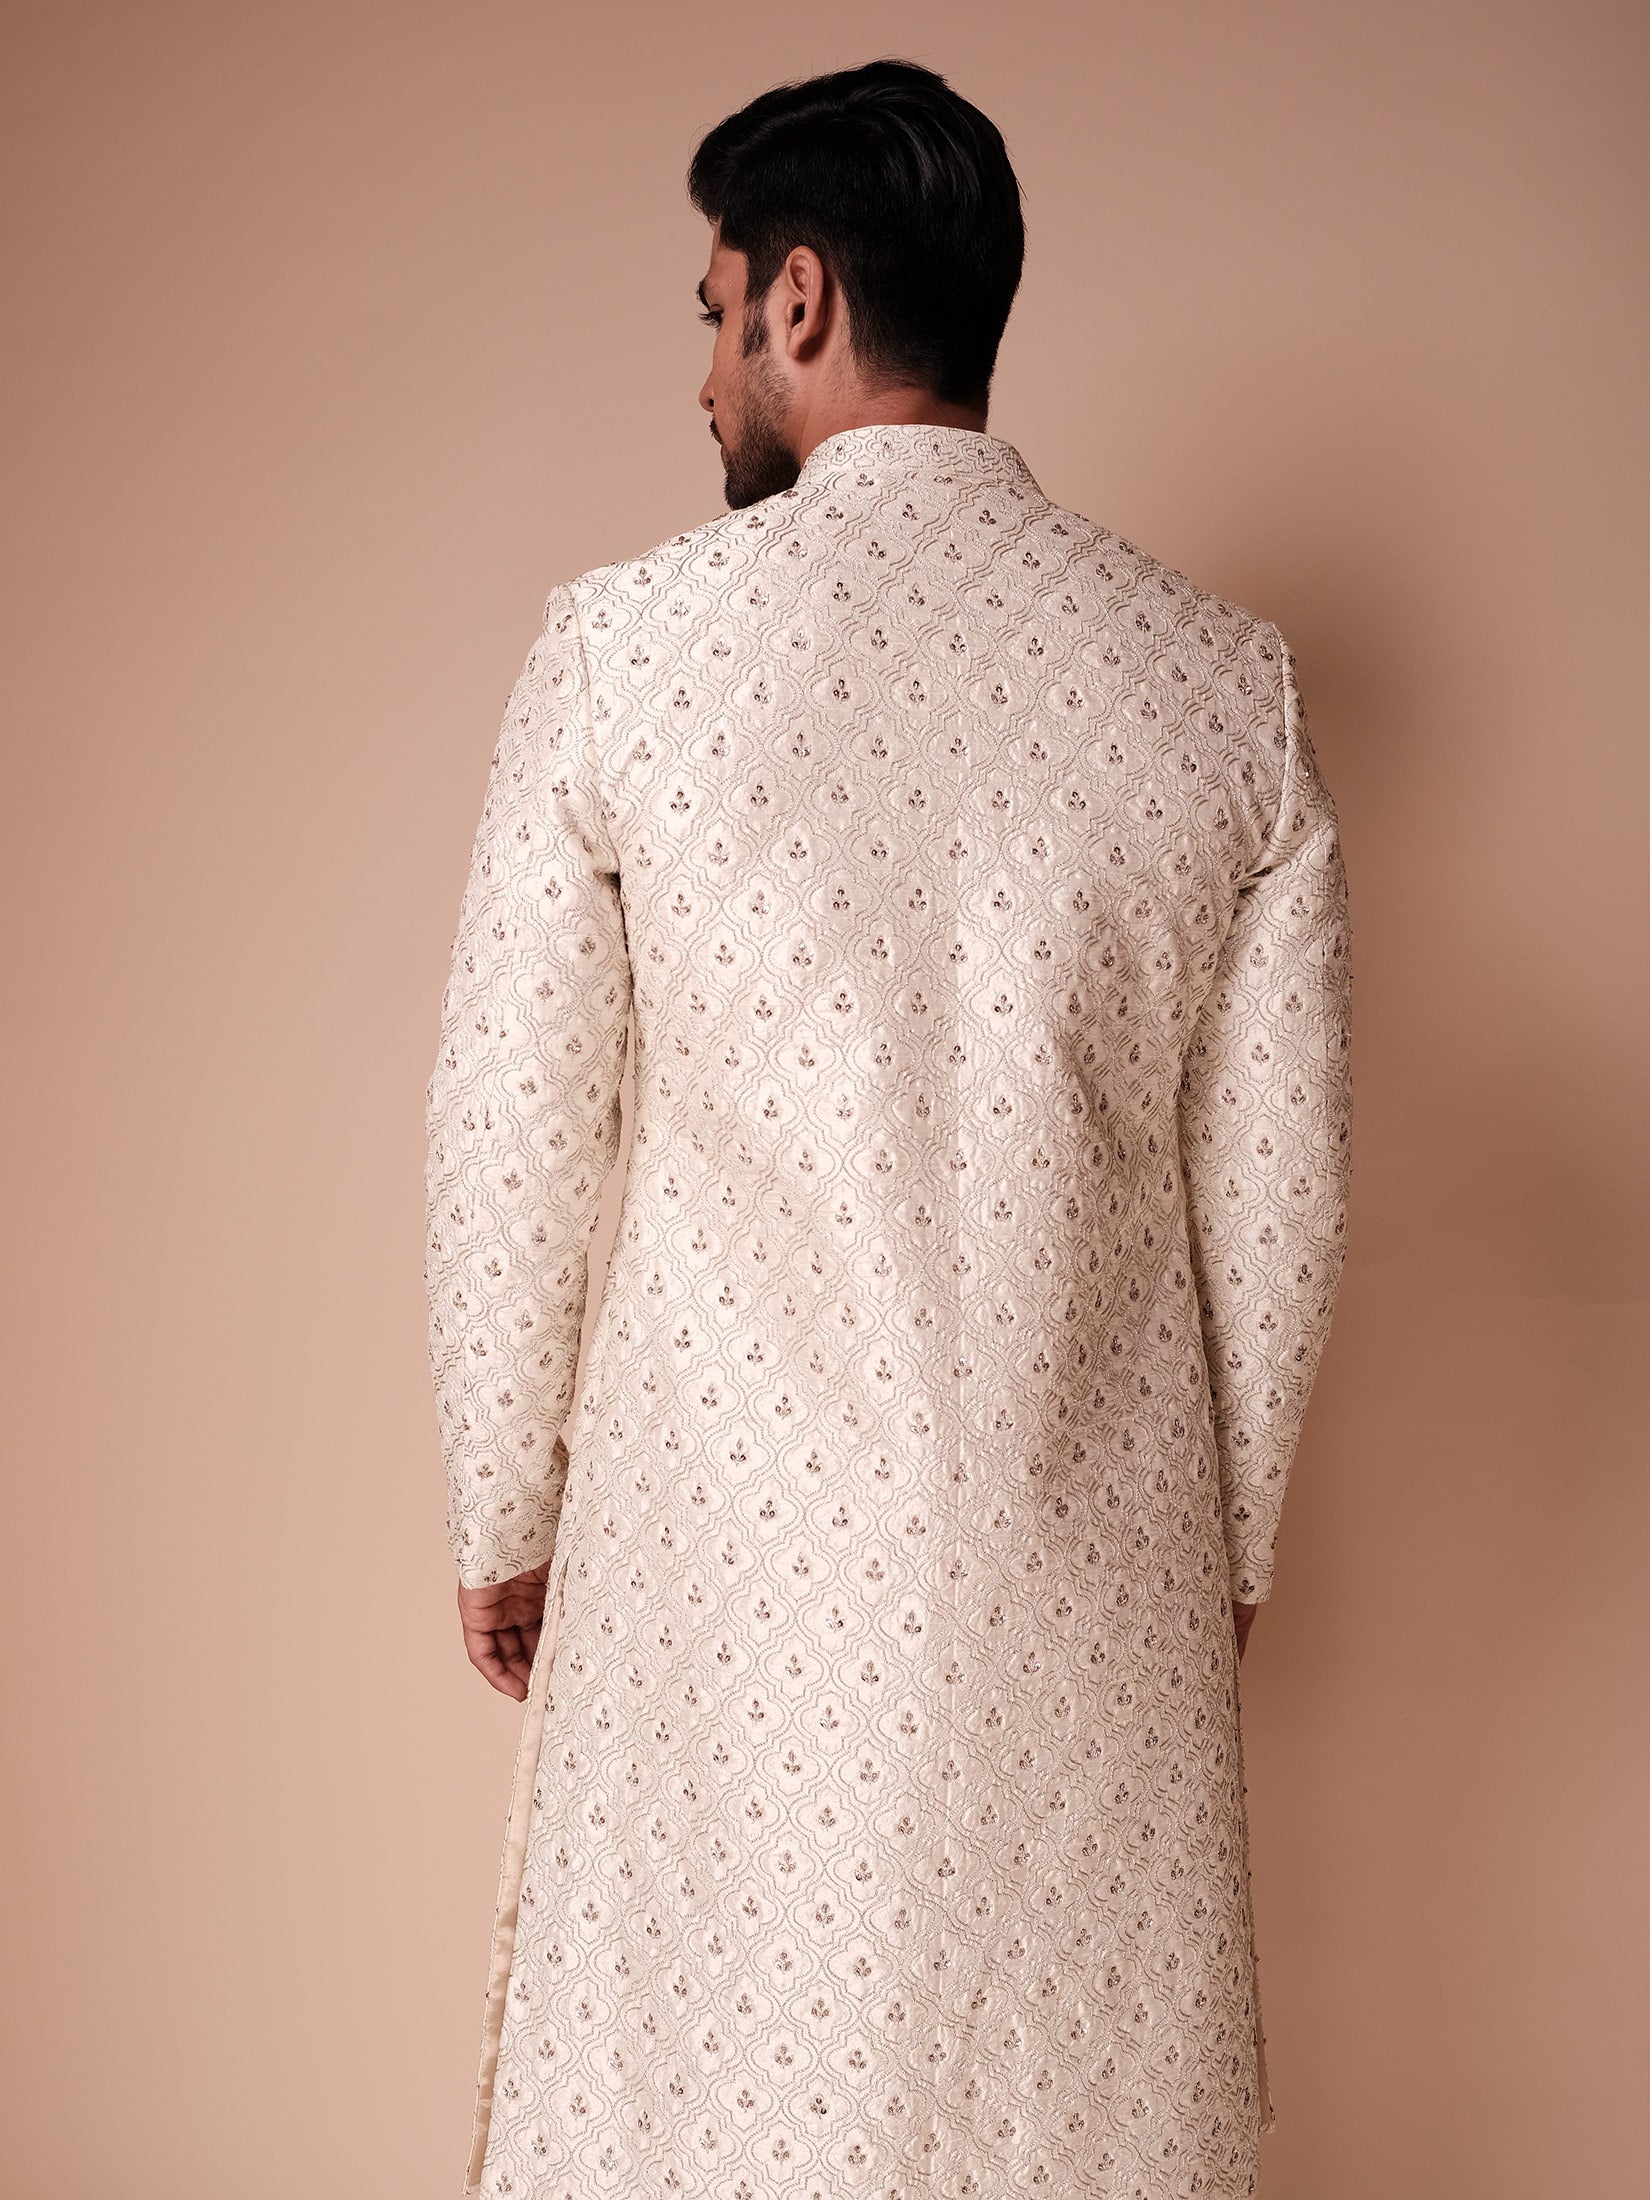 Ivory Sherwani With Embroidered Structure Jaal And Gold Clover Leaf Motifs Paired With Kurta And Churidar